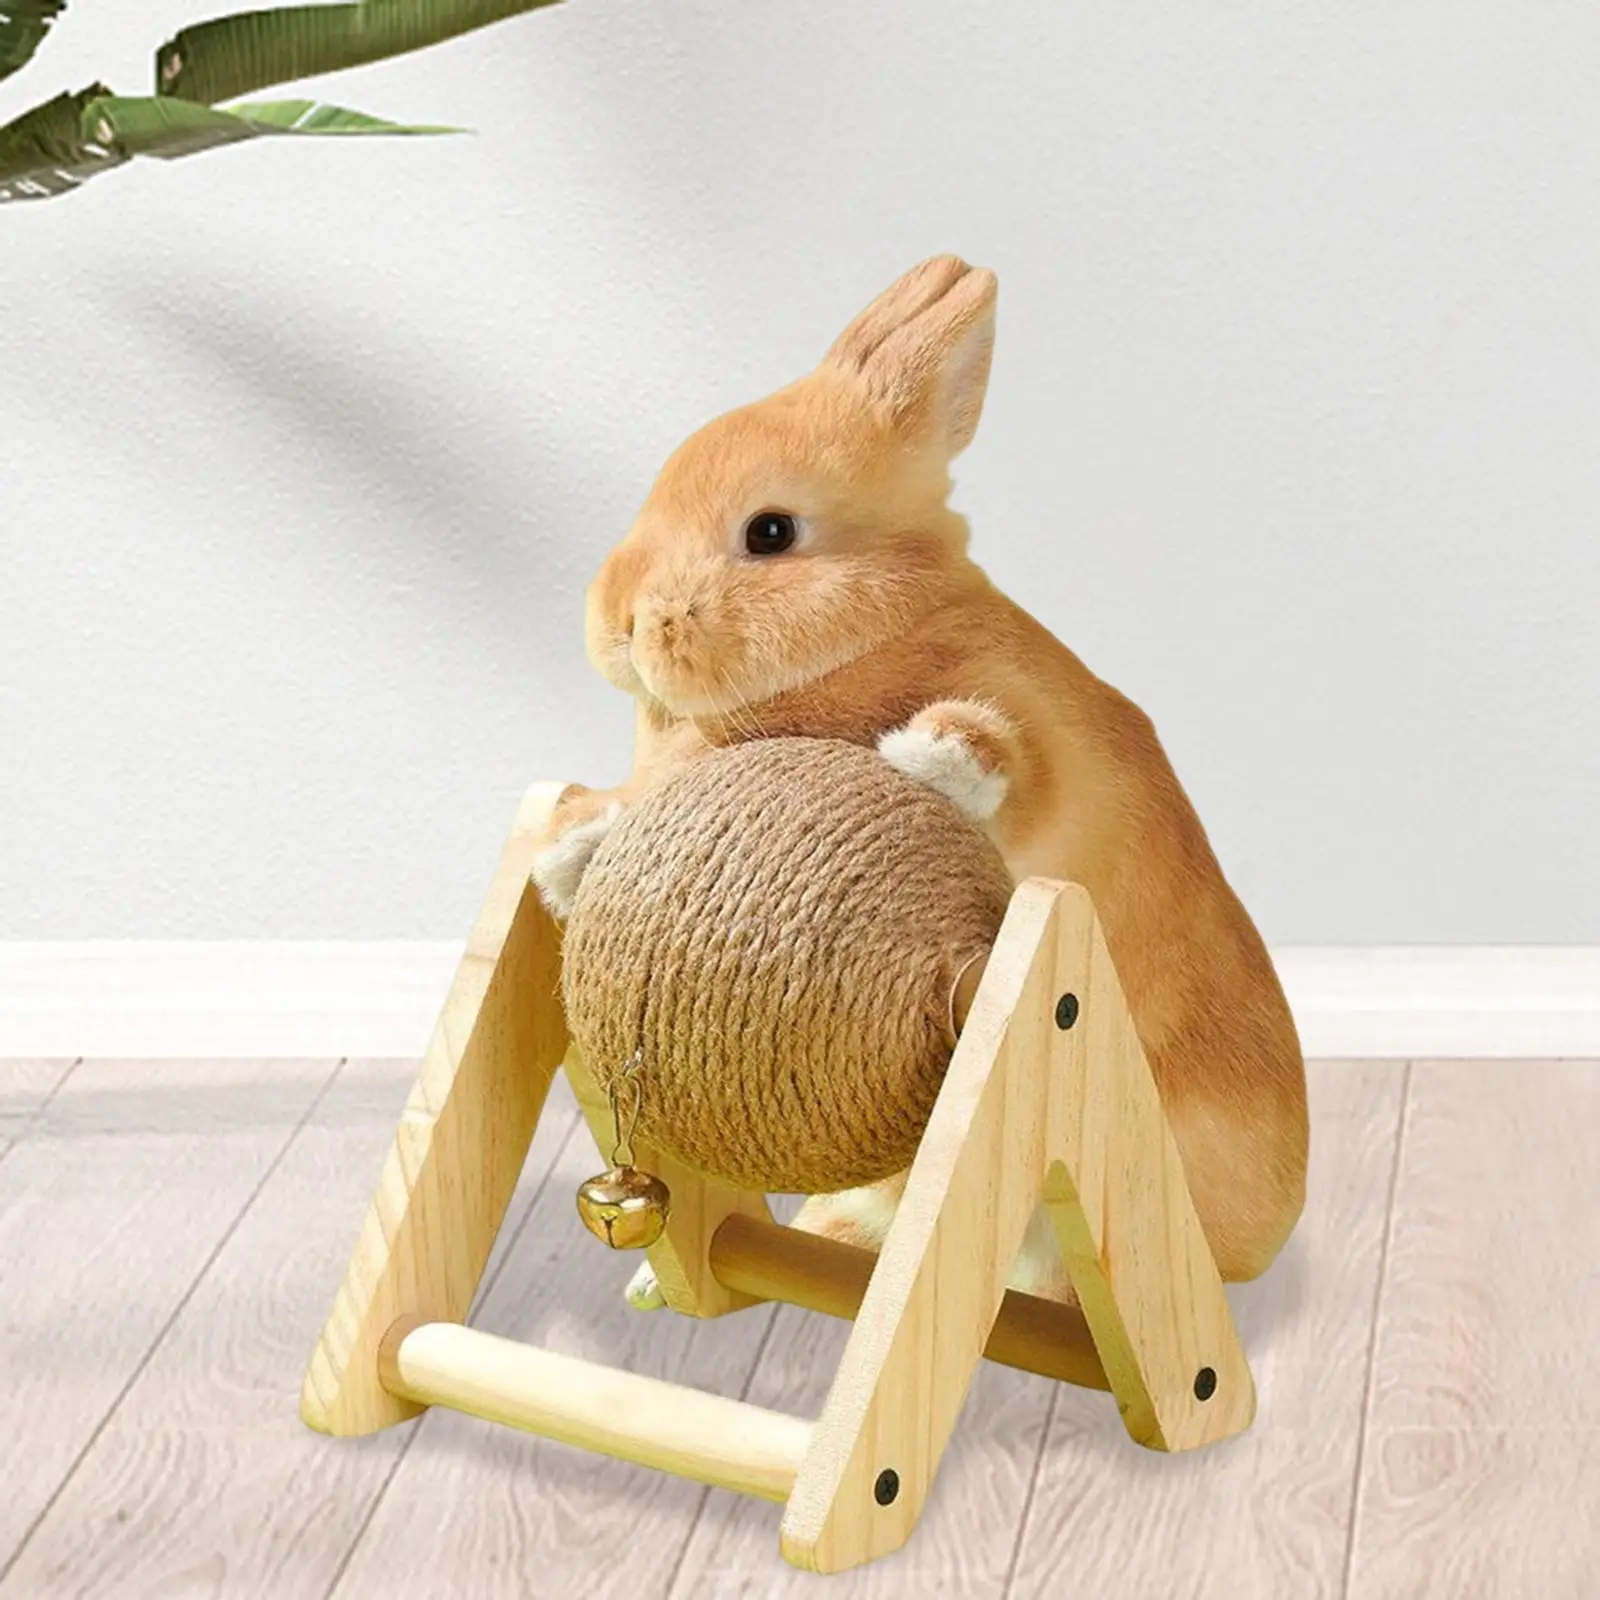 Rabbit Scratch Toy Bunny Scratcher with Ball Wear Resistant Scratch Resistant